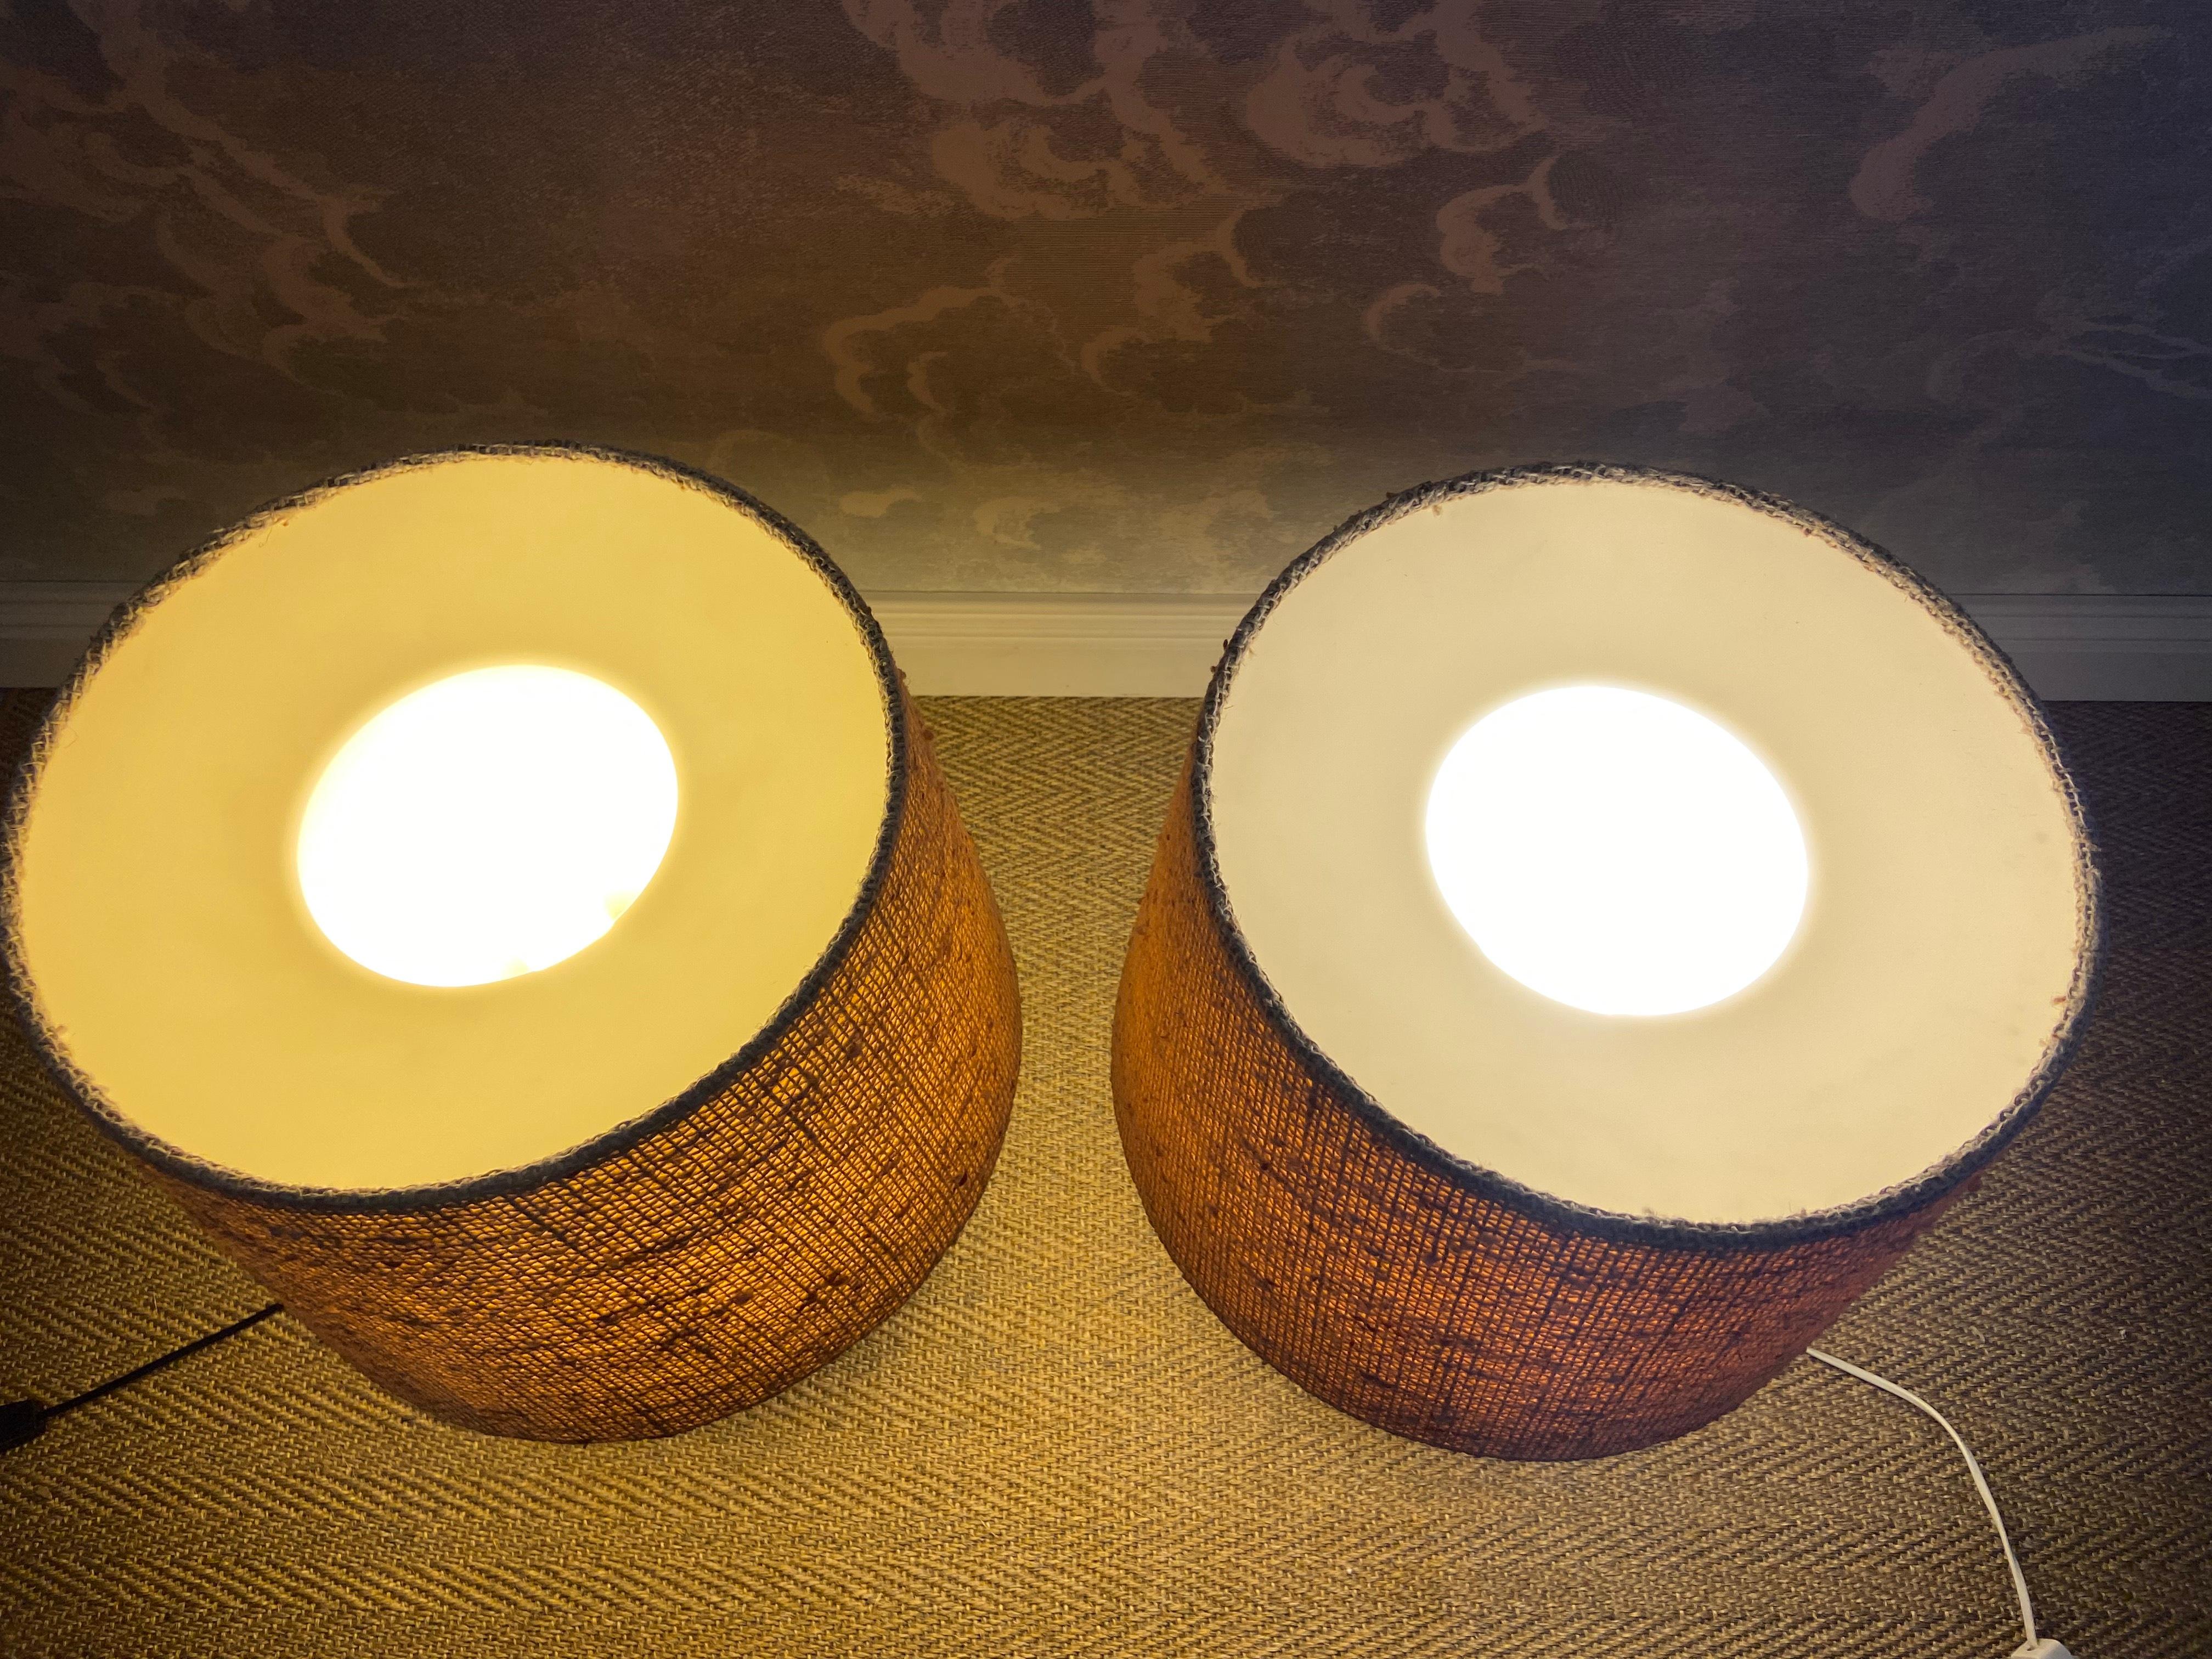 Pair of Rosenthal Studio Line Ceramic Table Lamps Tuscan Brown, Germany, 1960's For Sale 2